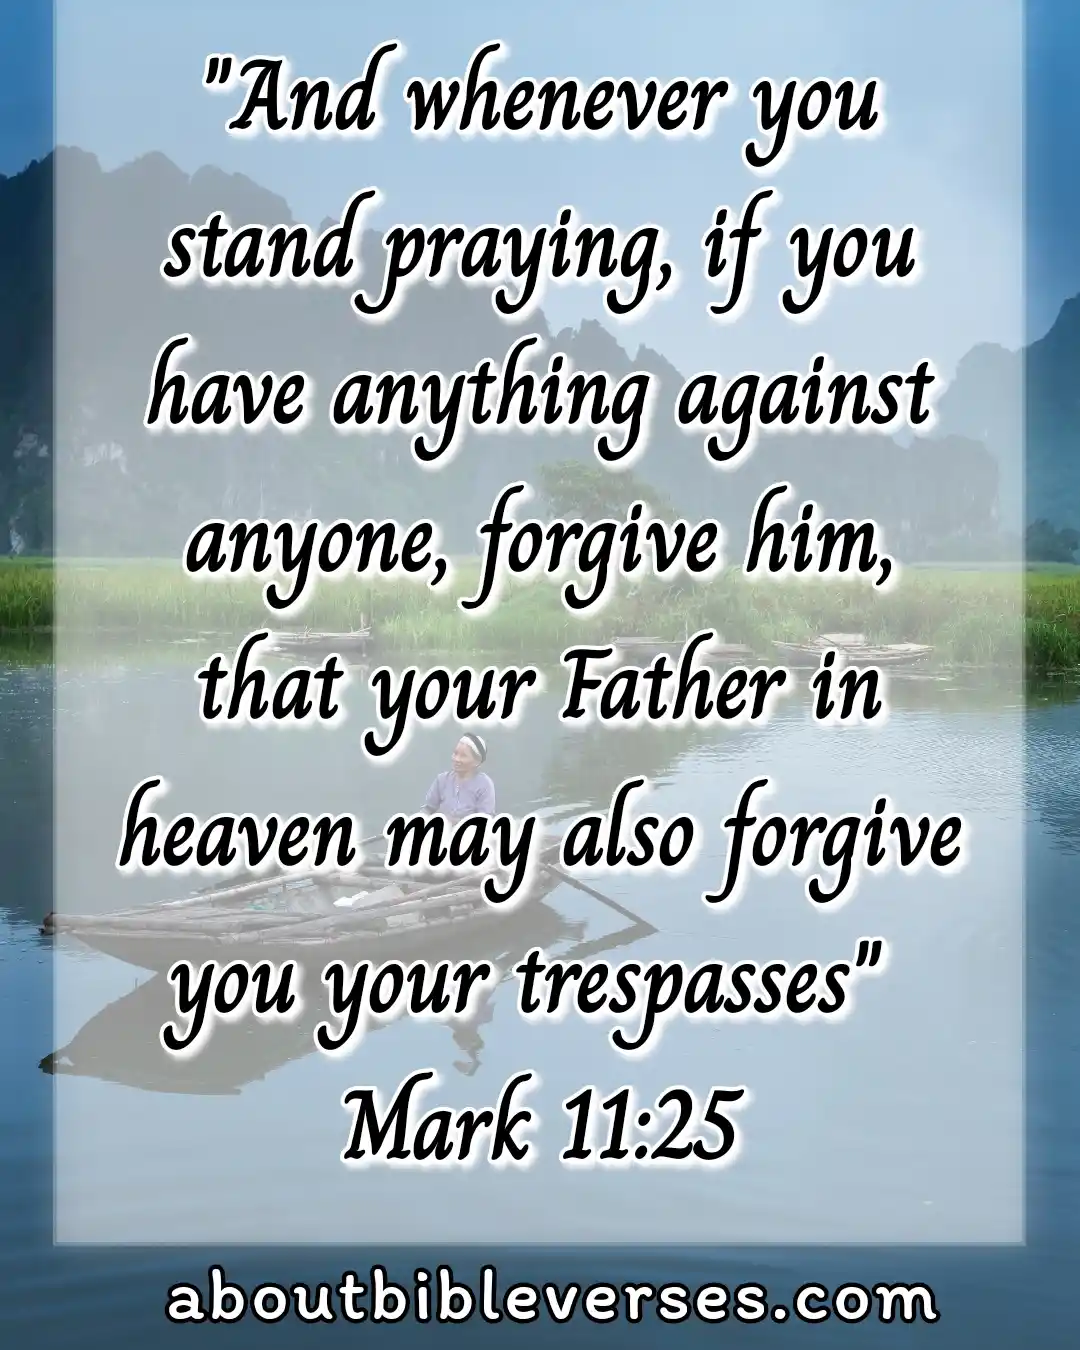 Bible Verses About Forgiving Others Who Hurt You (Mark 11:25)